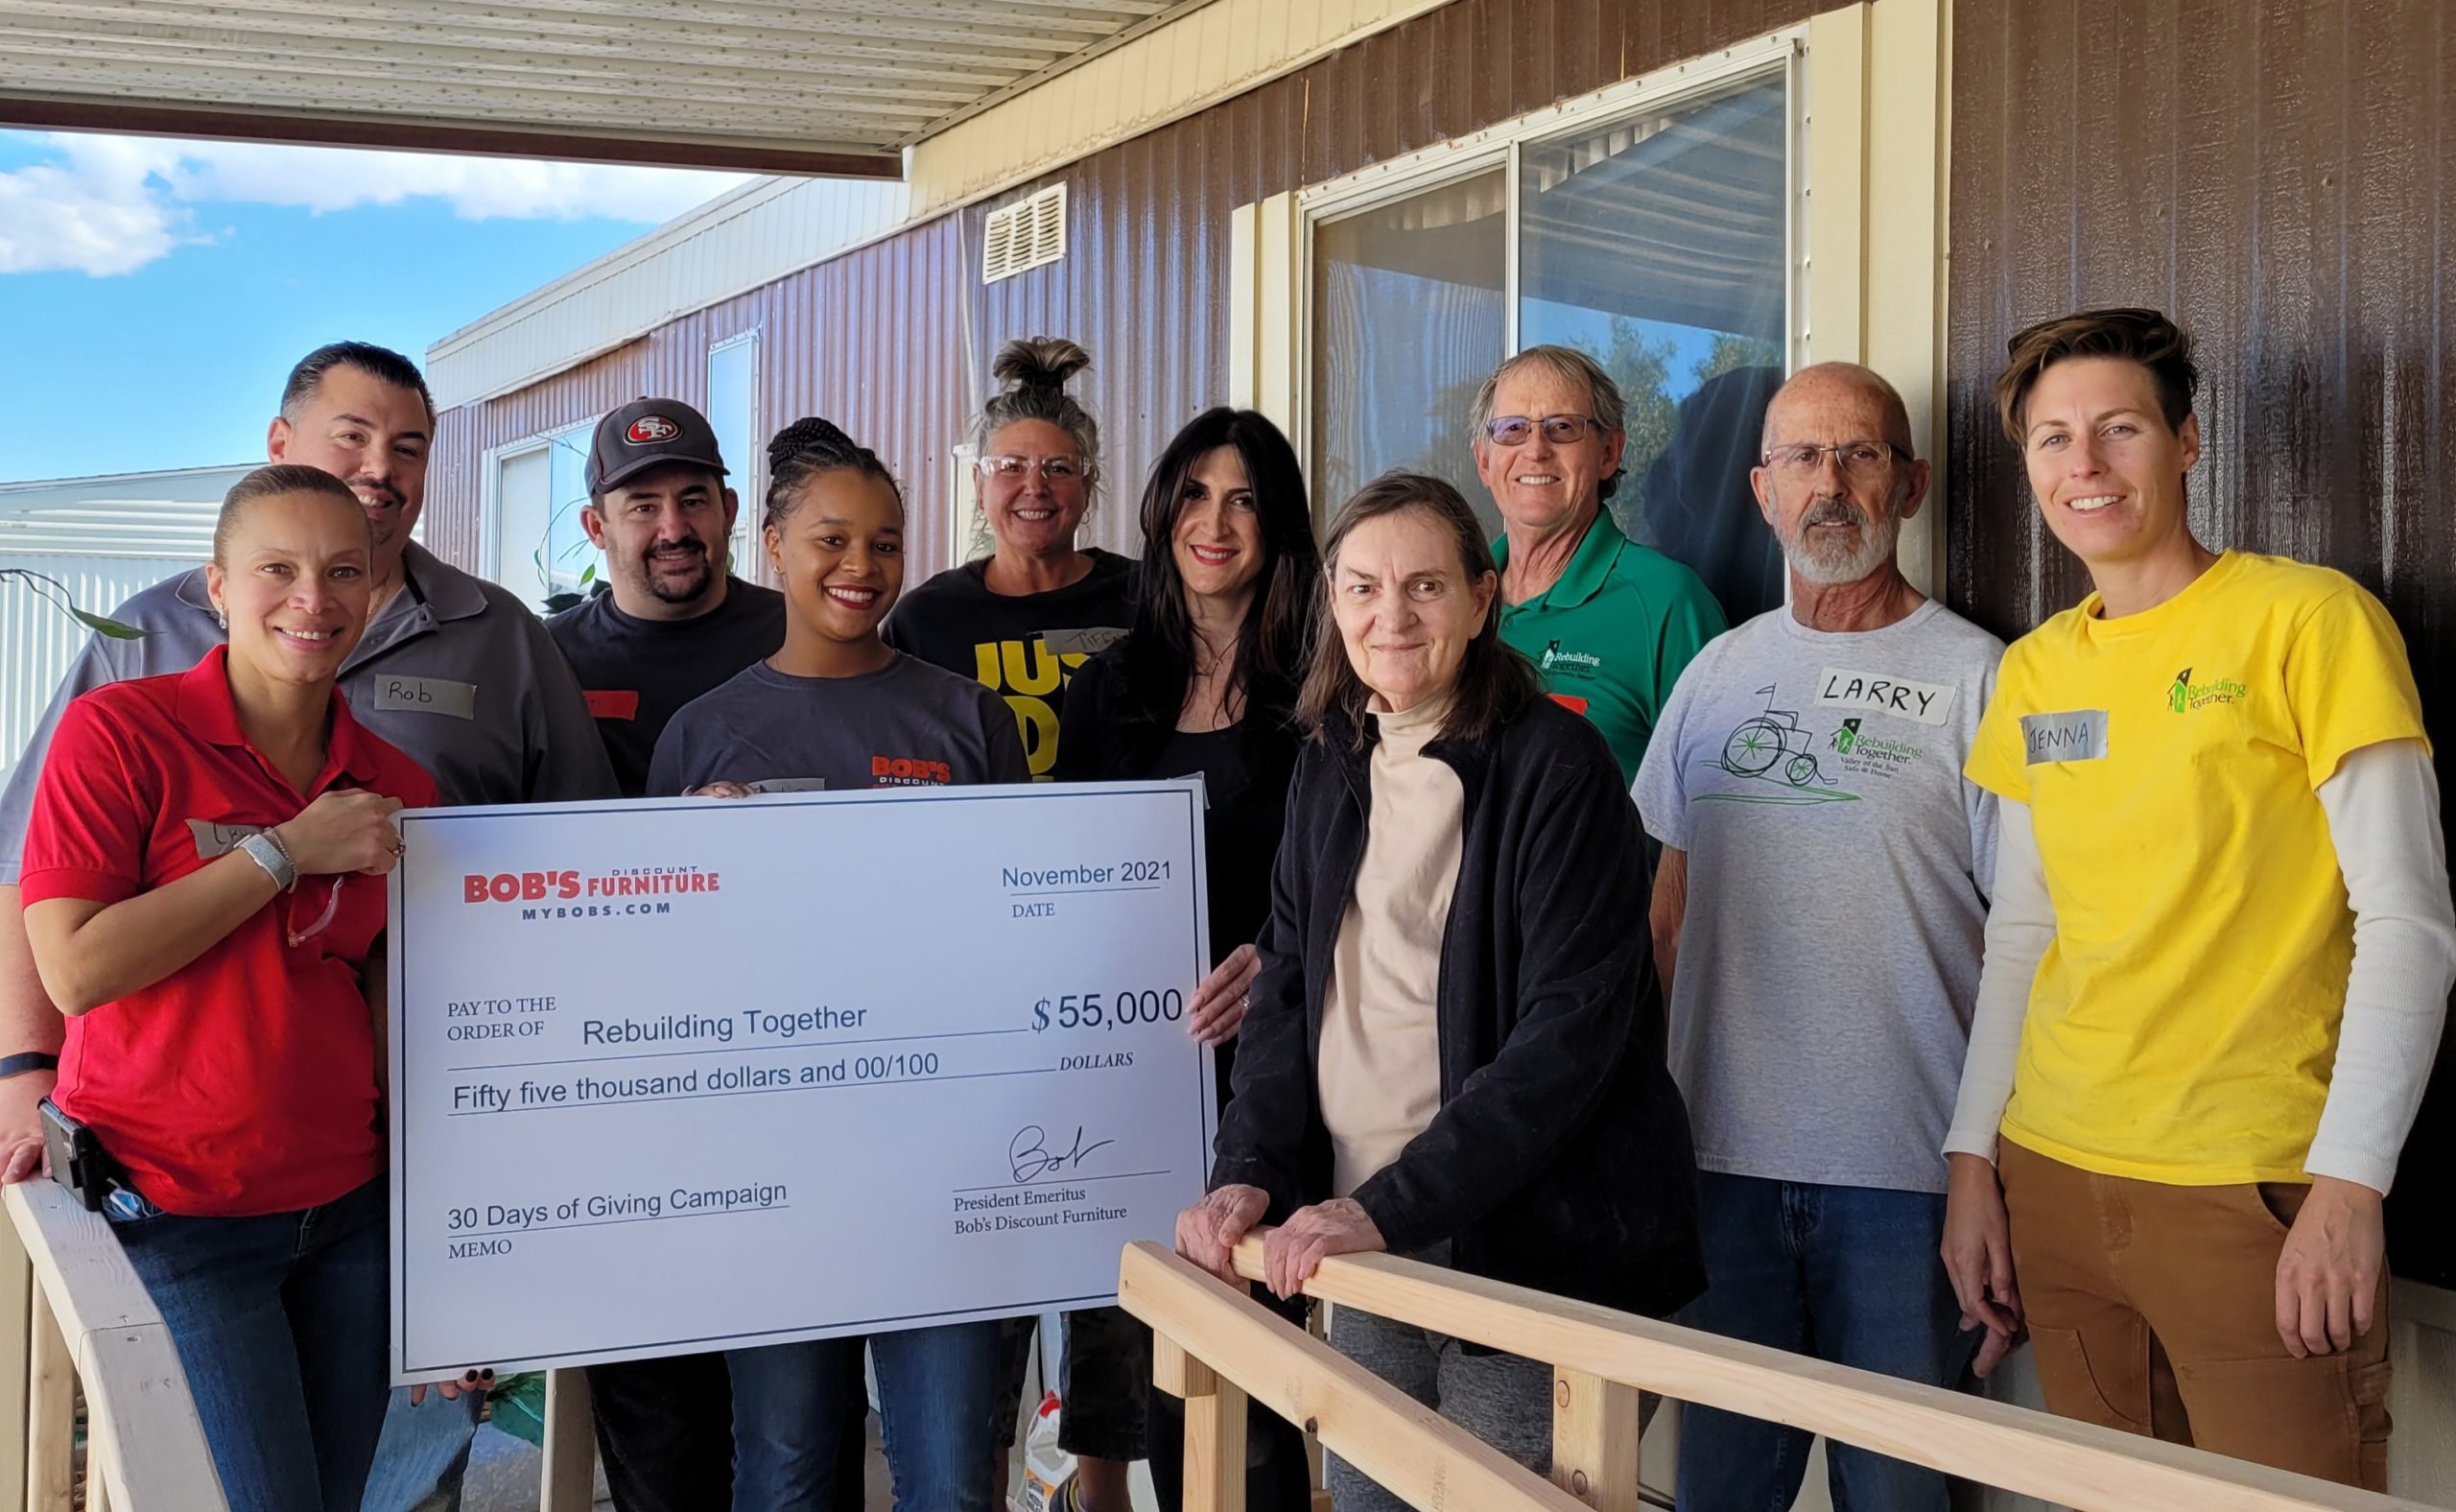 Bob's Discount Furniture presents Rebuilding Together with a check for $55,000